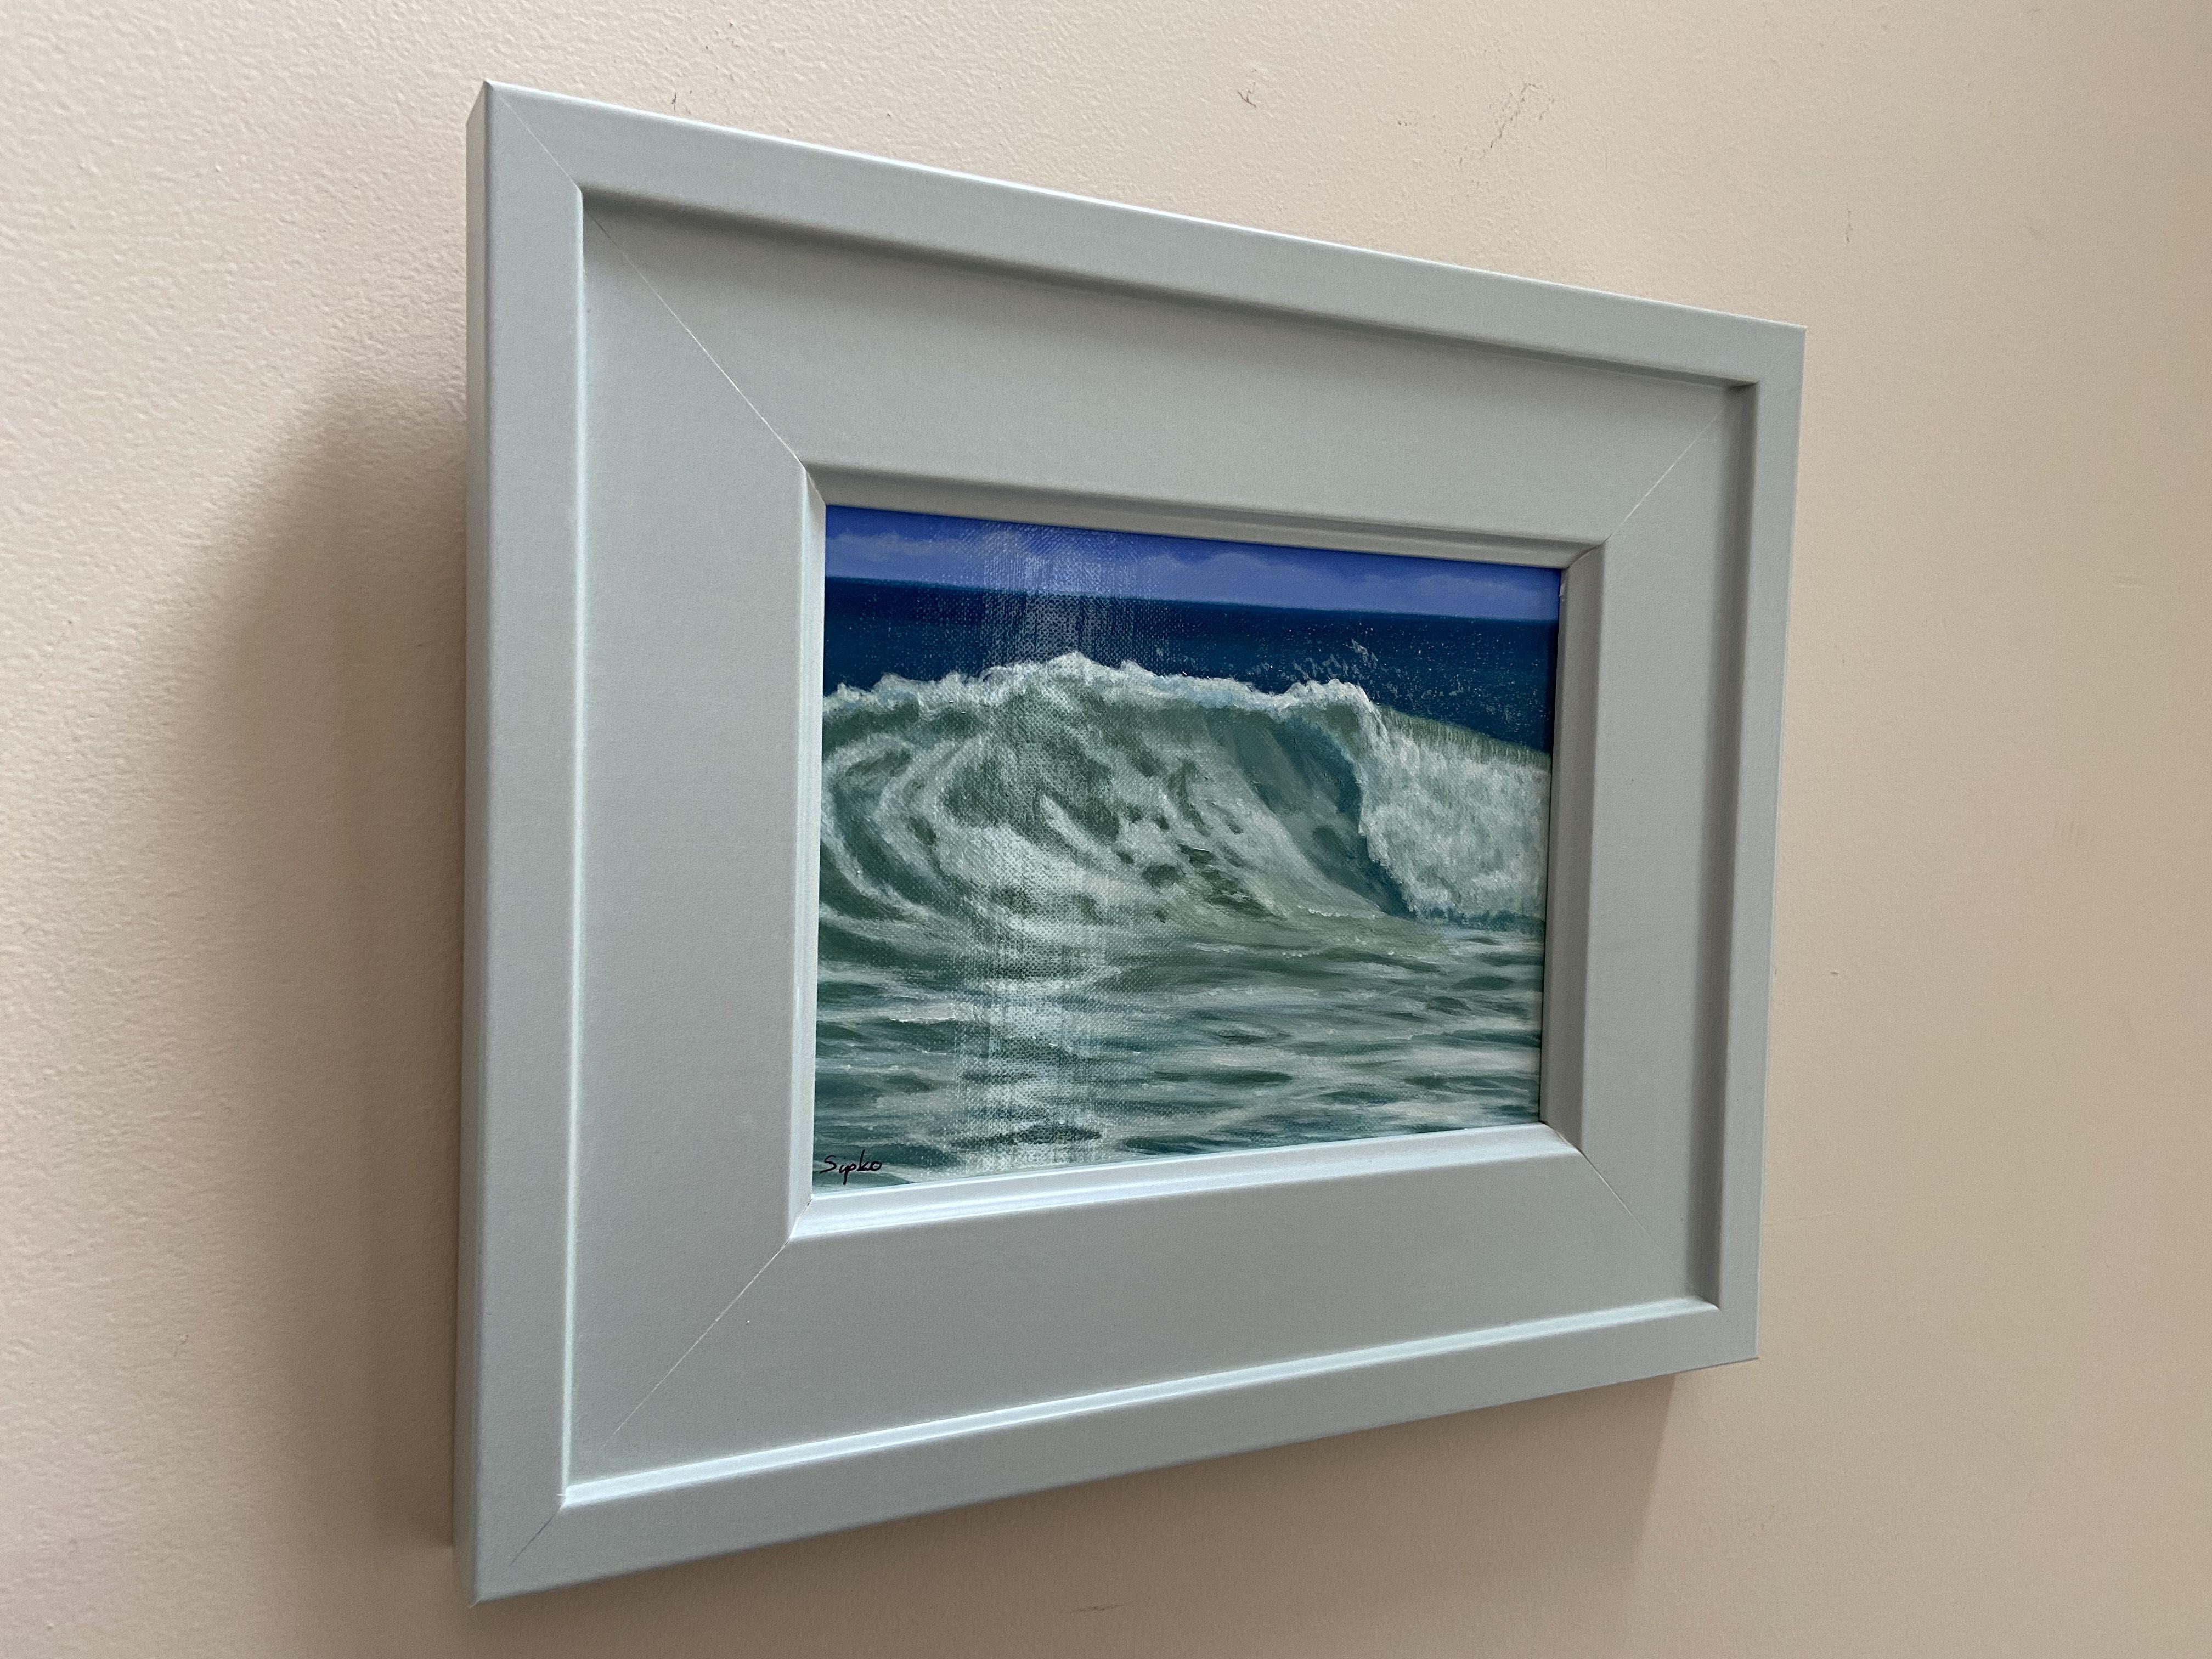 This is framed and ready to hang seascape of a breaking wave near the shore.  This piece is an oil on a linen panel and varnished to a glass like finish.  It has been framed in a cool gray wooden frame.  I love the ocean and am often times